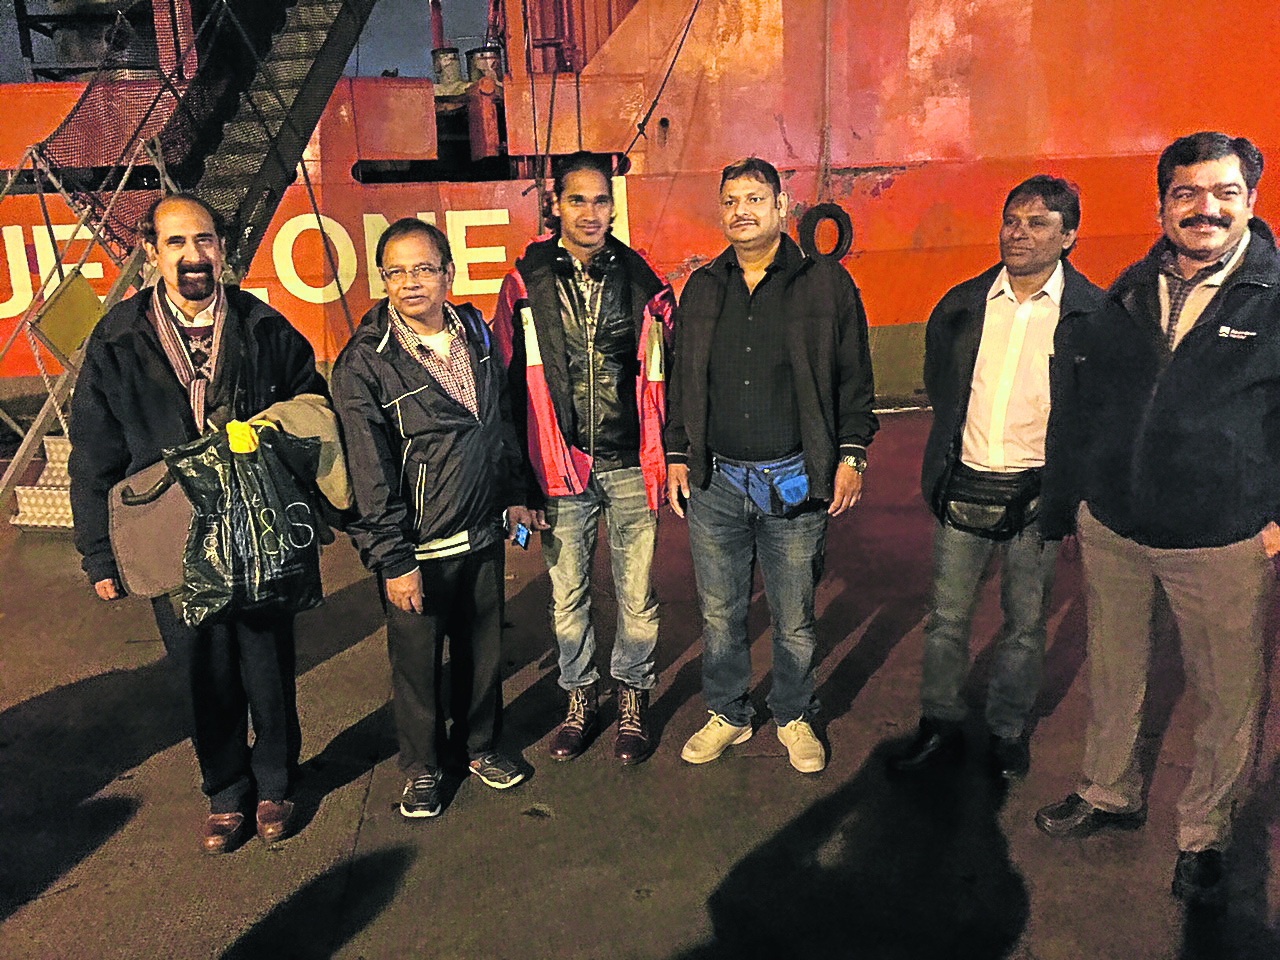 Six of the crewmen from the Malaviya Seven offshore supply vessel are heading home to India, while the remaining six are due to follow in around 10 weeks